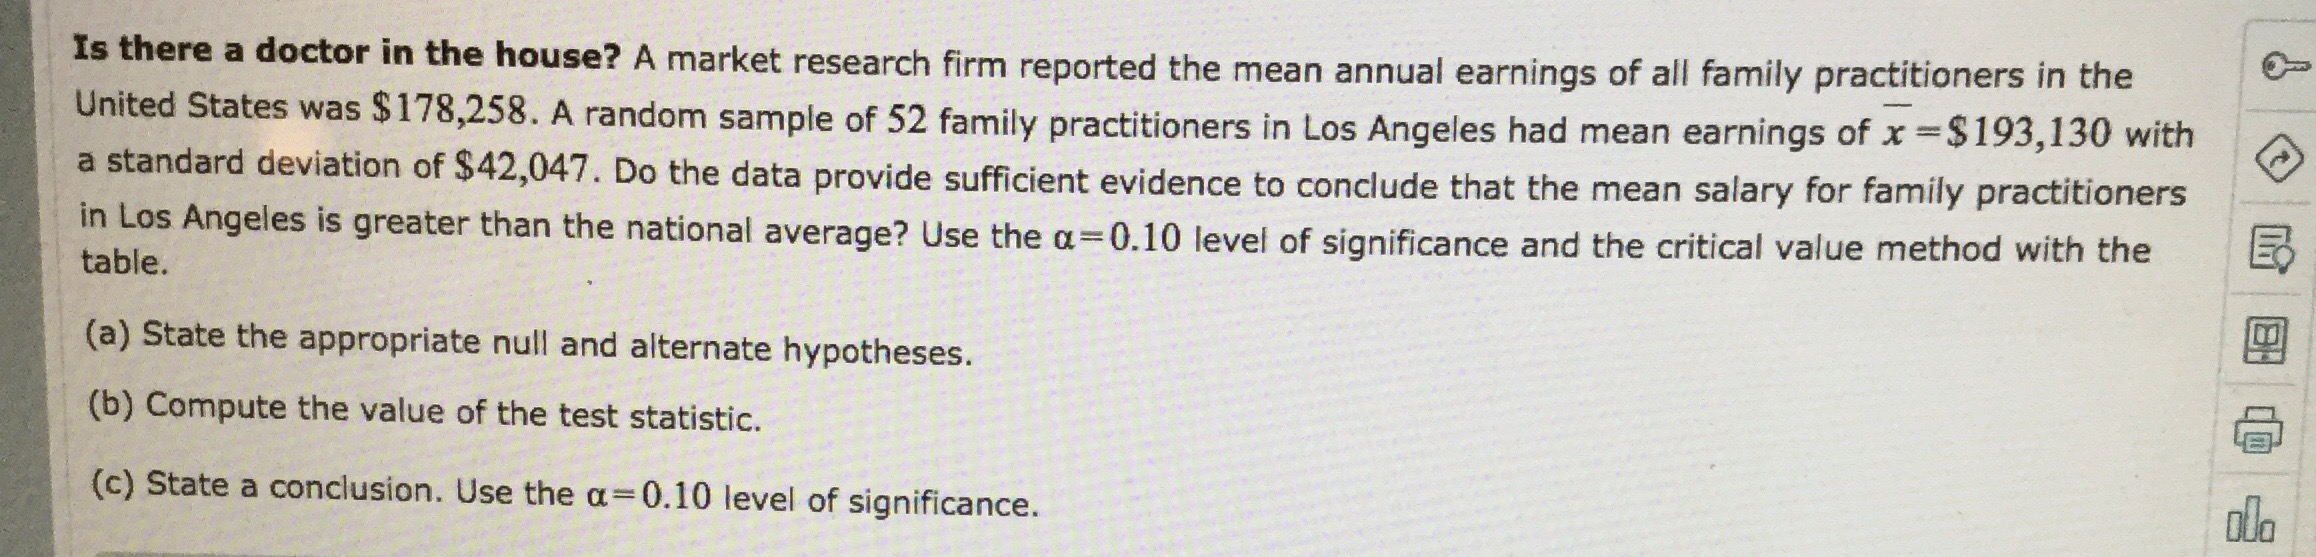 Is there a doctor in the house? A market research firm reported the mean annual earnings of all family practitioners in the
United States was $178,258. A random sample of 52 family practitioners in Los Angeles had mean earnings of x$193,130 with
a standard deviation of $42,047. Do the data provide sufficient evidence to conclude that the mean salary for family practitioners
in Los Angeles is greater than the national average? Use the a 0.10 level of significance and the critical value method with the
table.
(a) State the appropriate null and alternate hypotheses.
(b) Compute the value of the test statistic.
ola
(c) State a conclusion. Use the a
= 0.10 level of significance.
